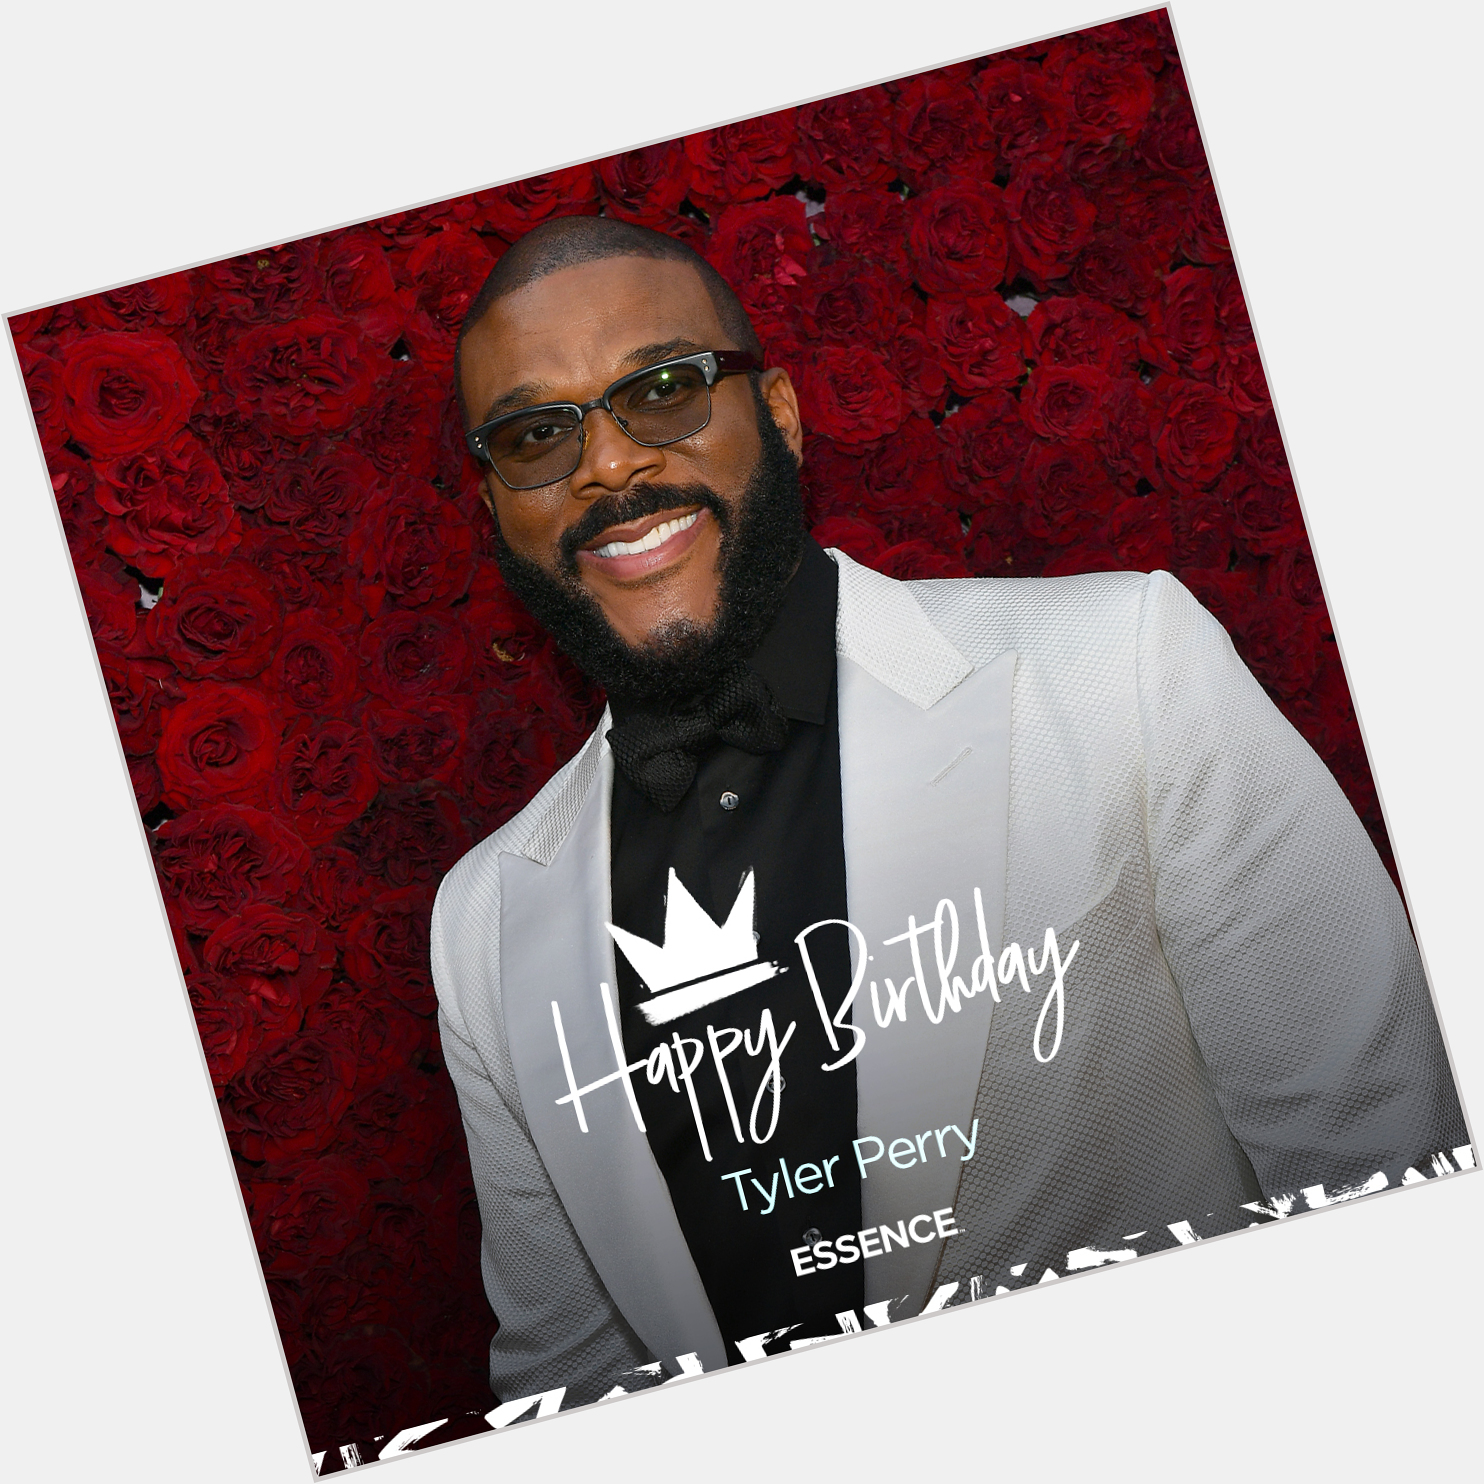 Happy birthday to the iconic Tyler Perry! 